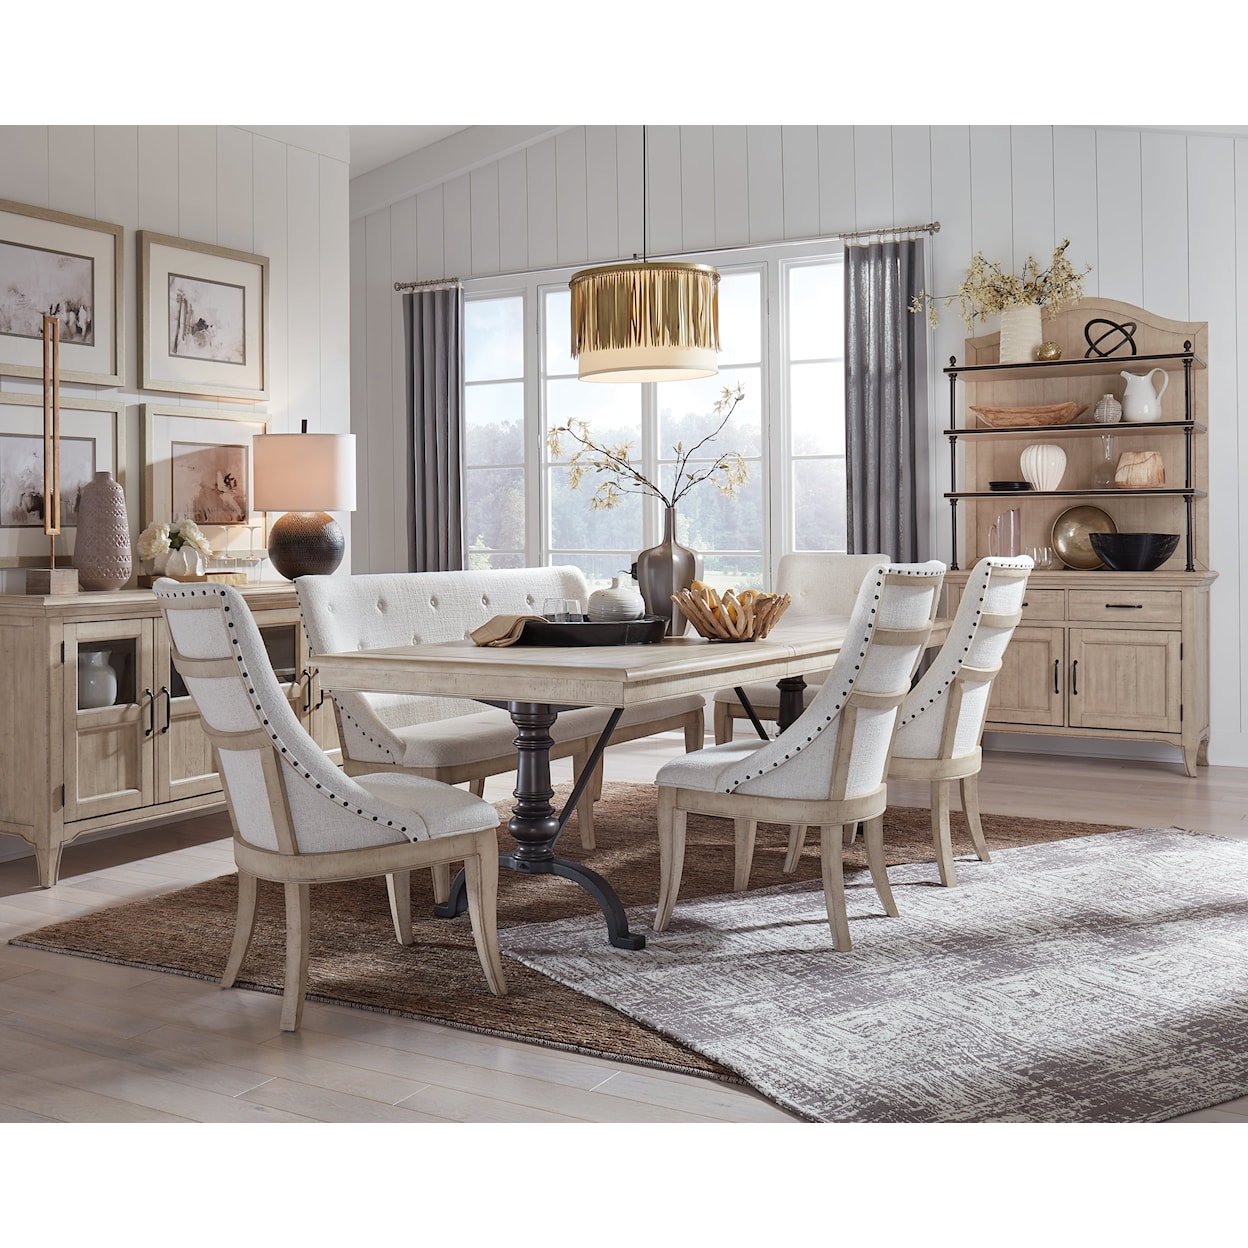 Magnussen Home Harlow Dining Dining Room Groups